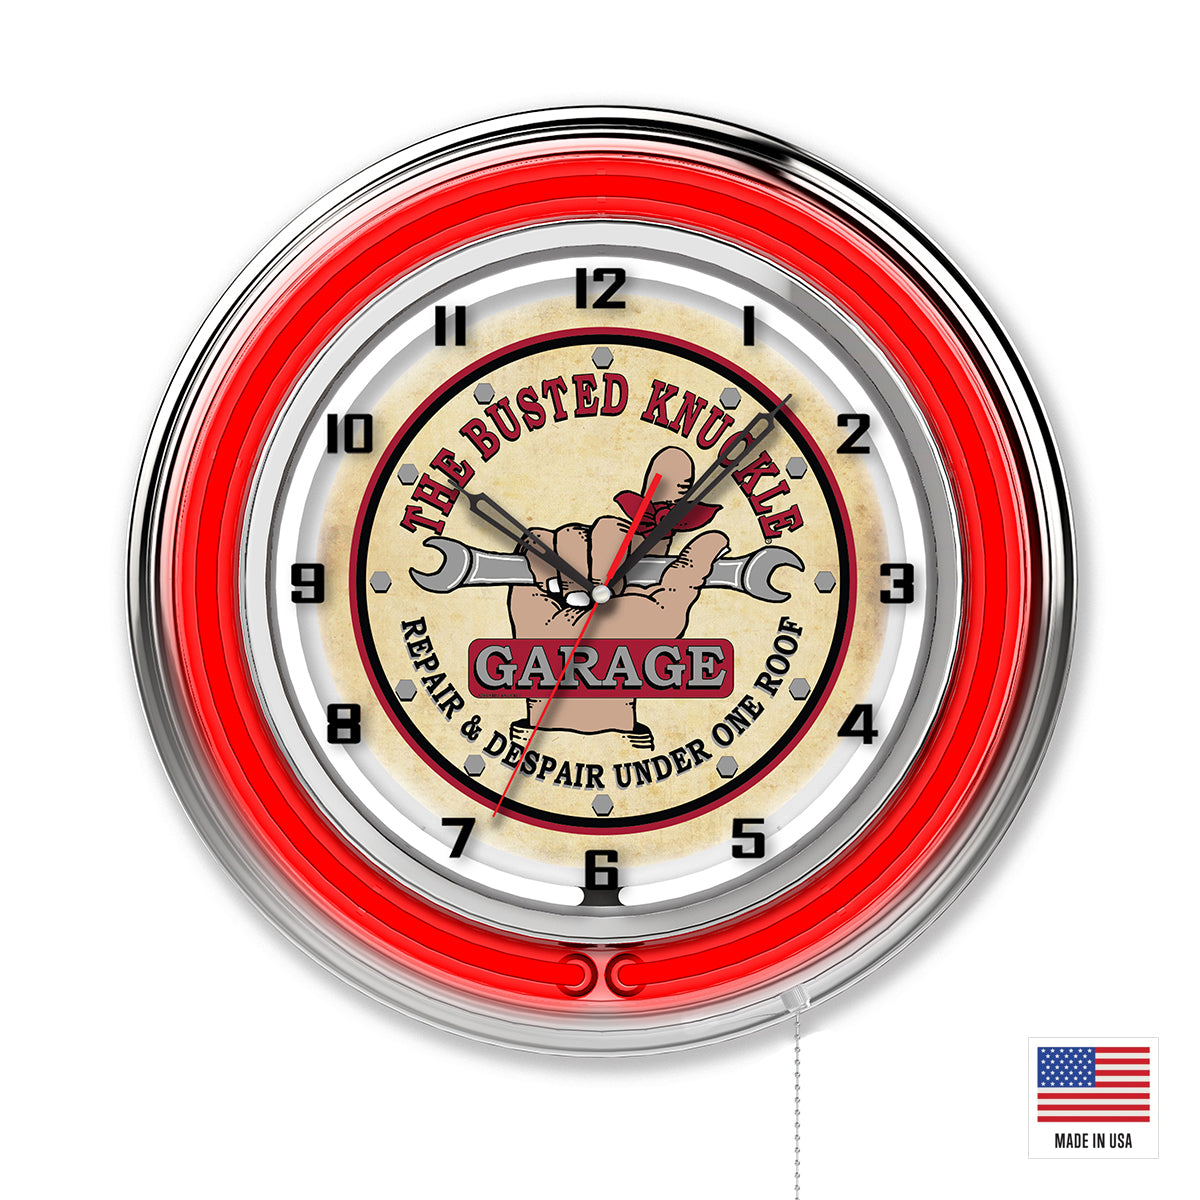 Busted Knuckle Garage Vintage Style Shop Clock - Red Neon